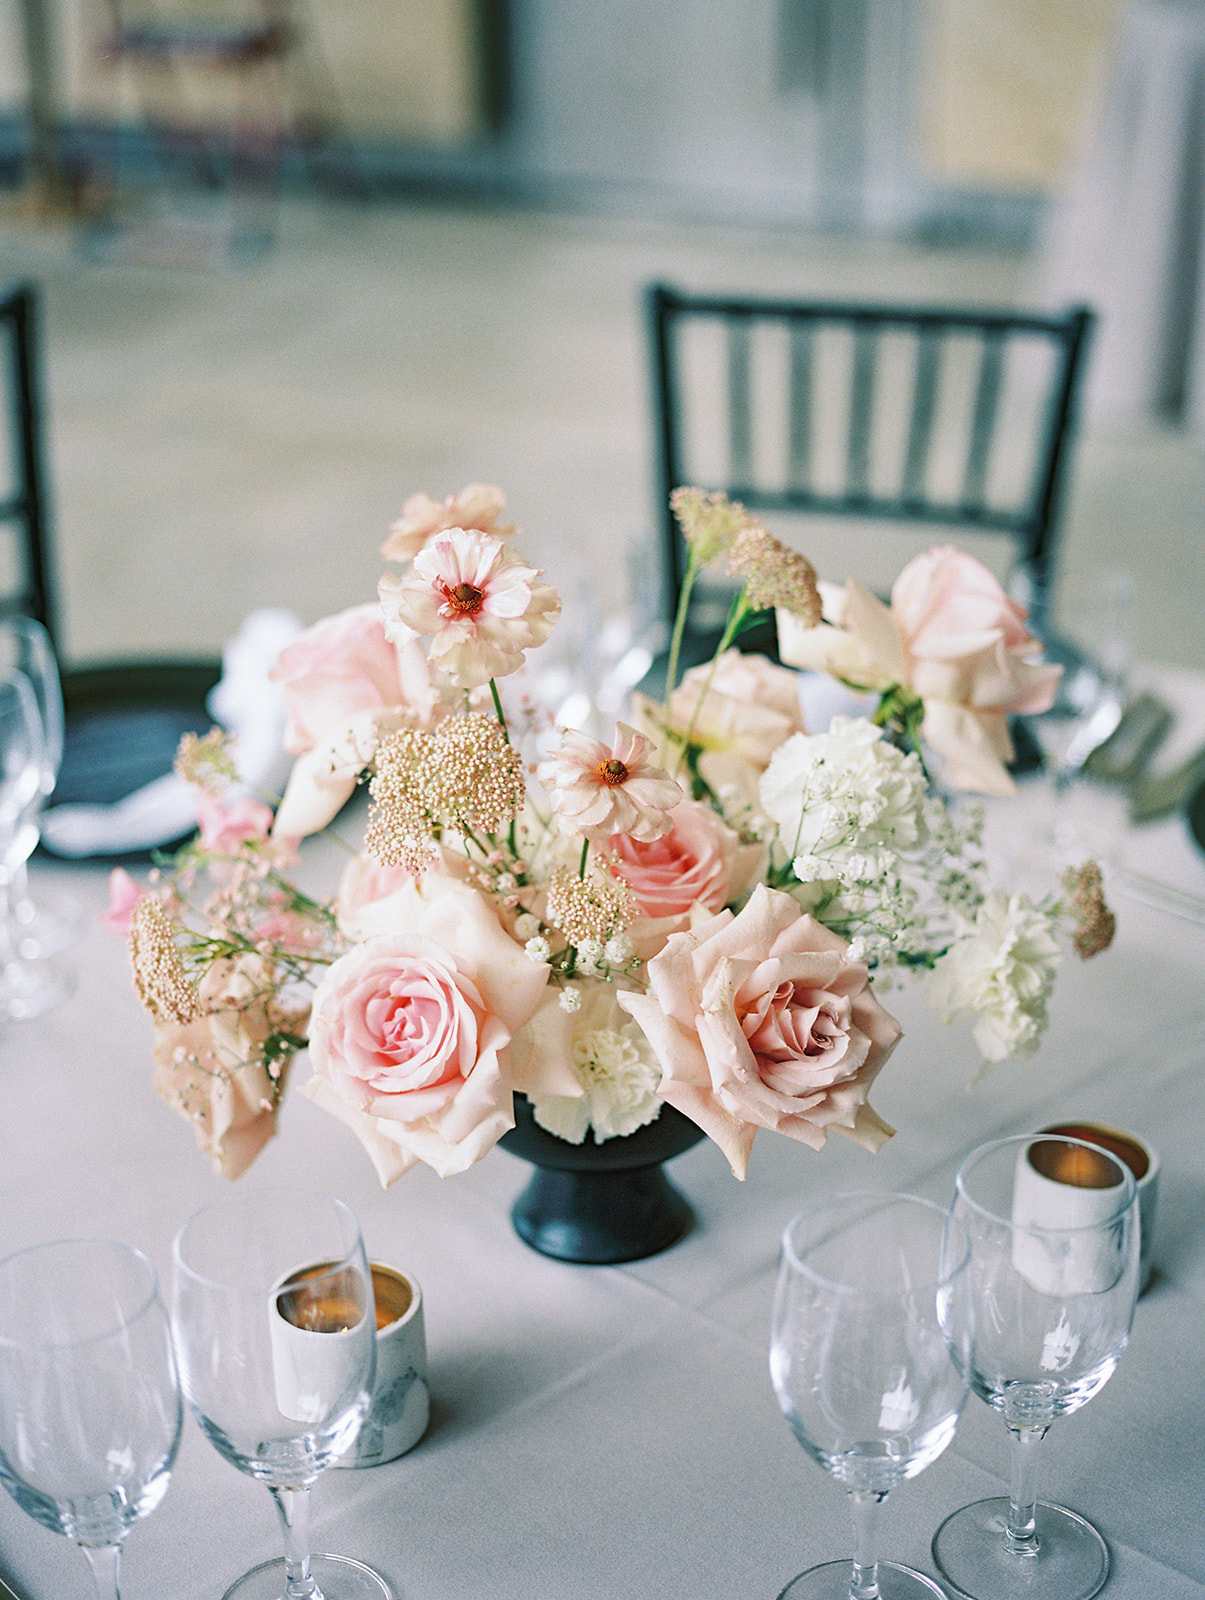 modern wedding centerpiece with black compote with roses, ranunculus, and lisianthus in white and blush